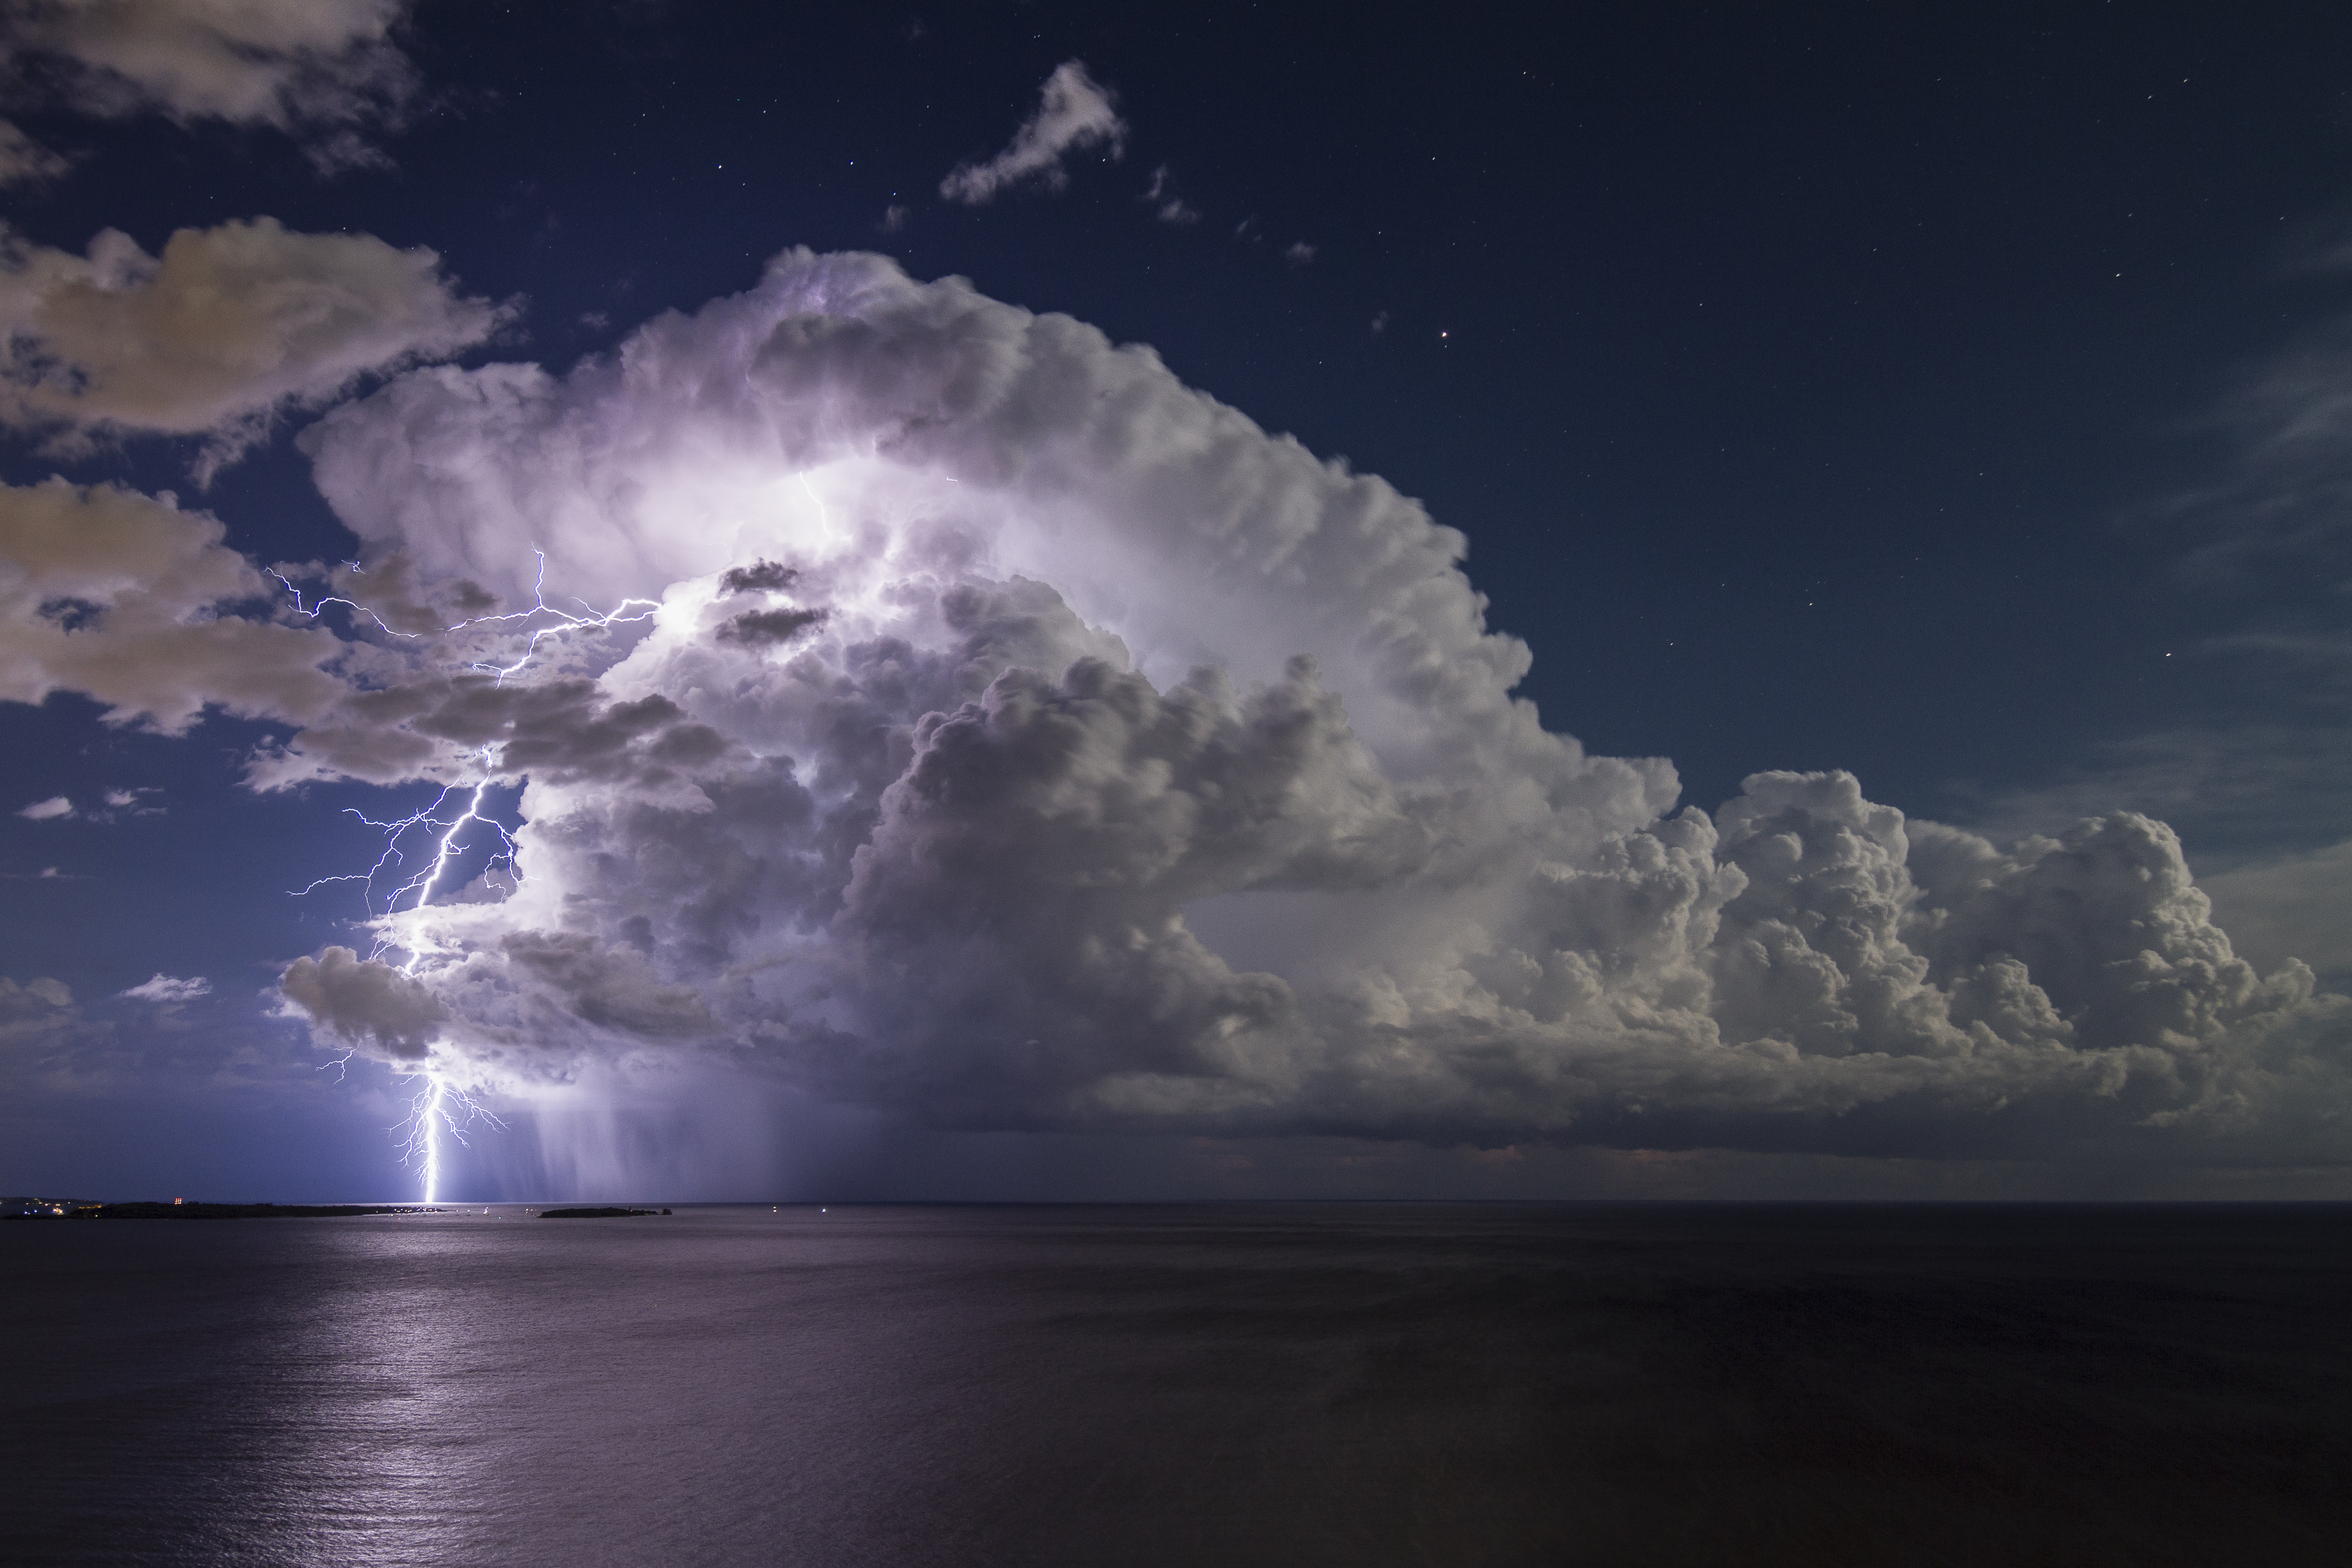 'Lightning from an Isolated Storm over Cannes Bay' © Serge Zaka